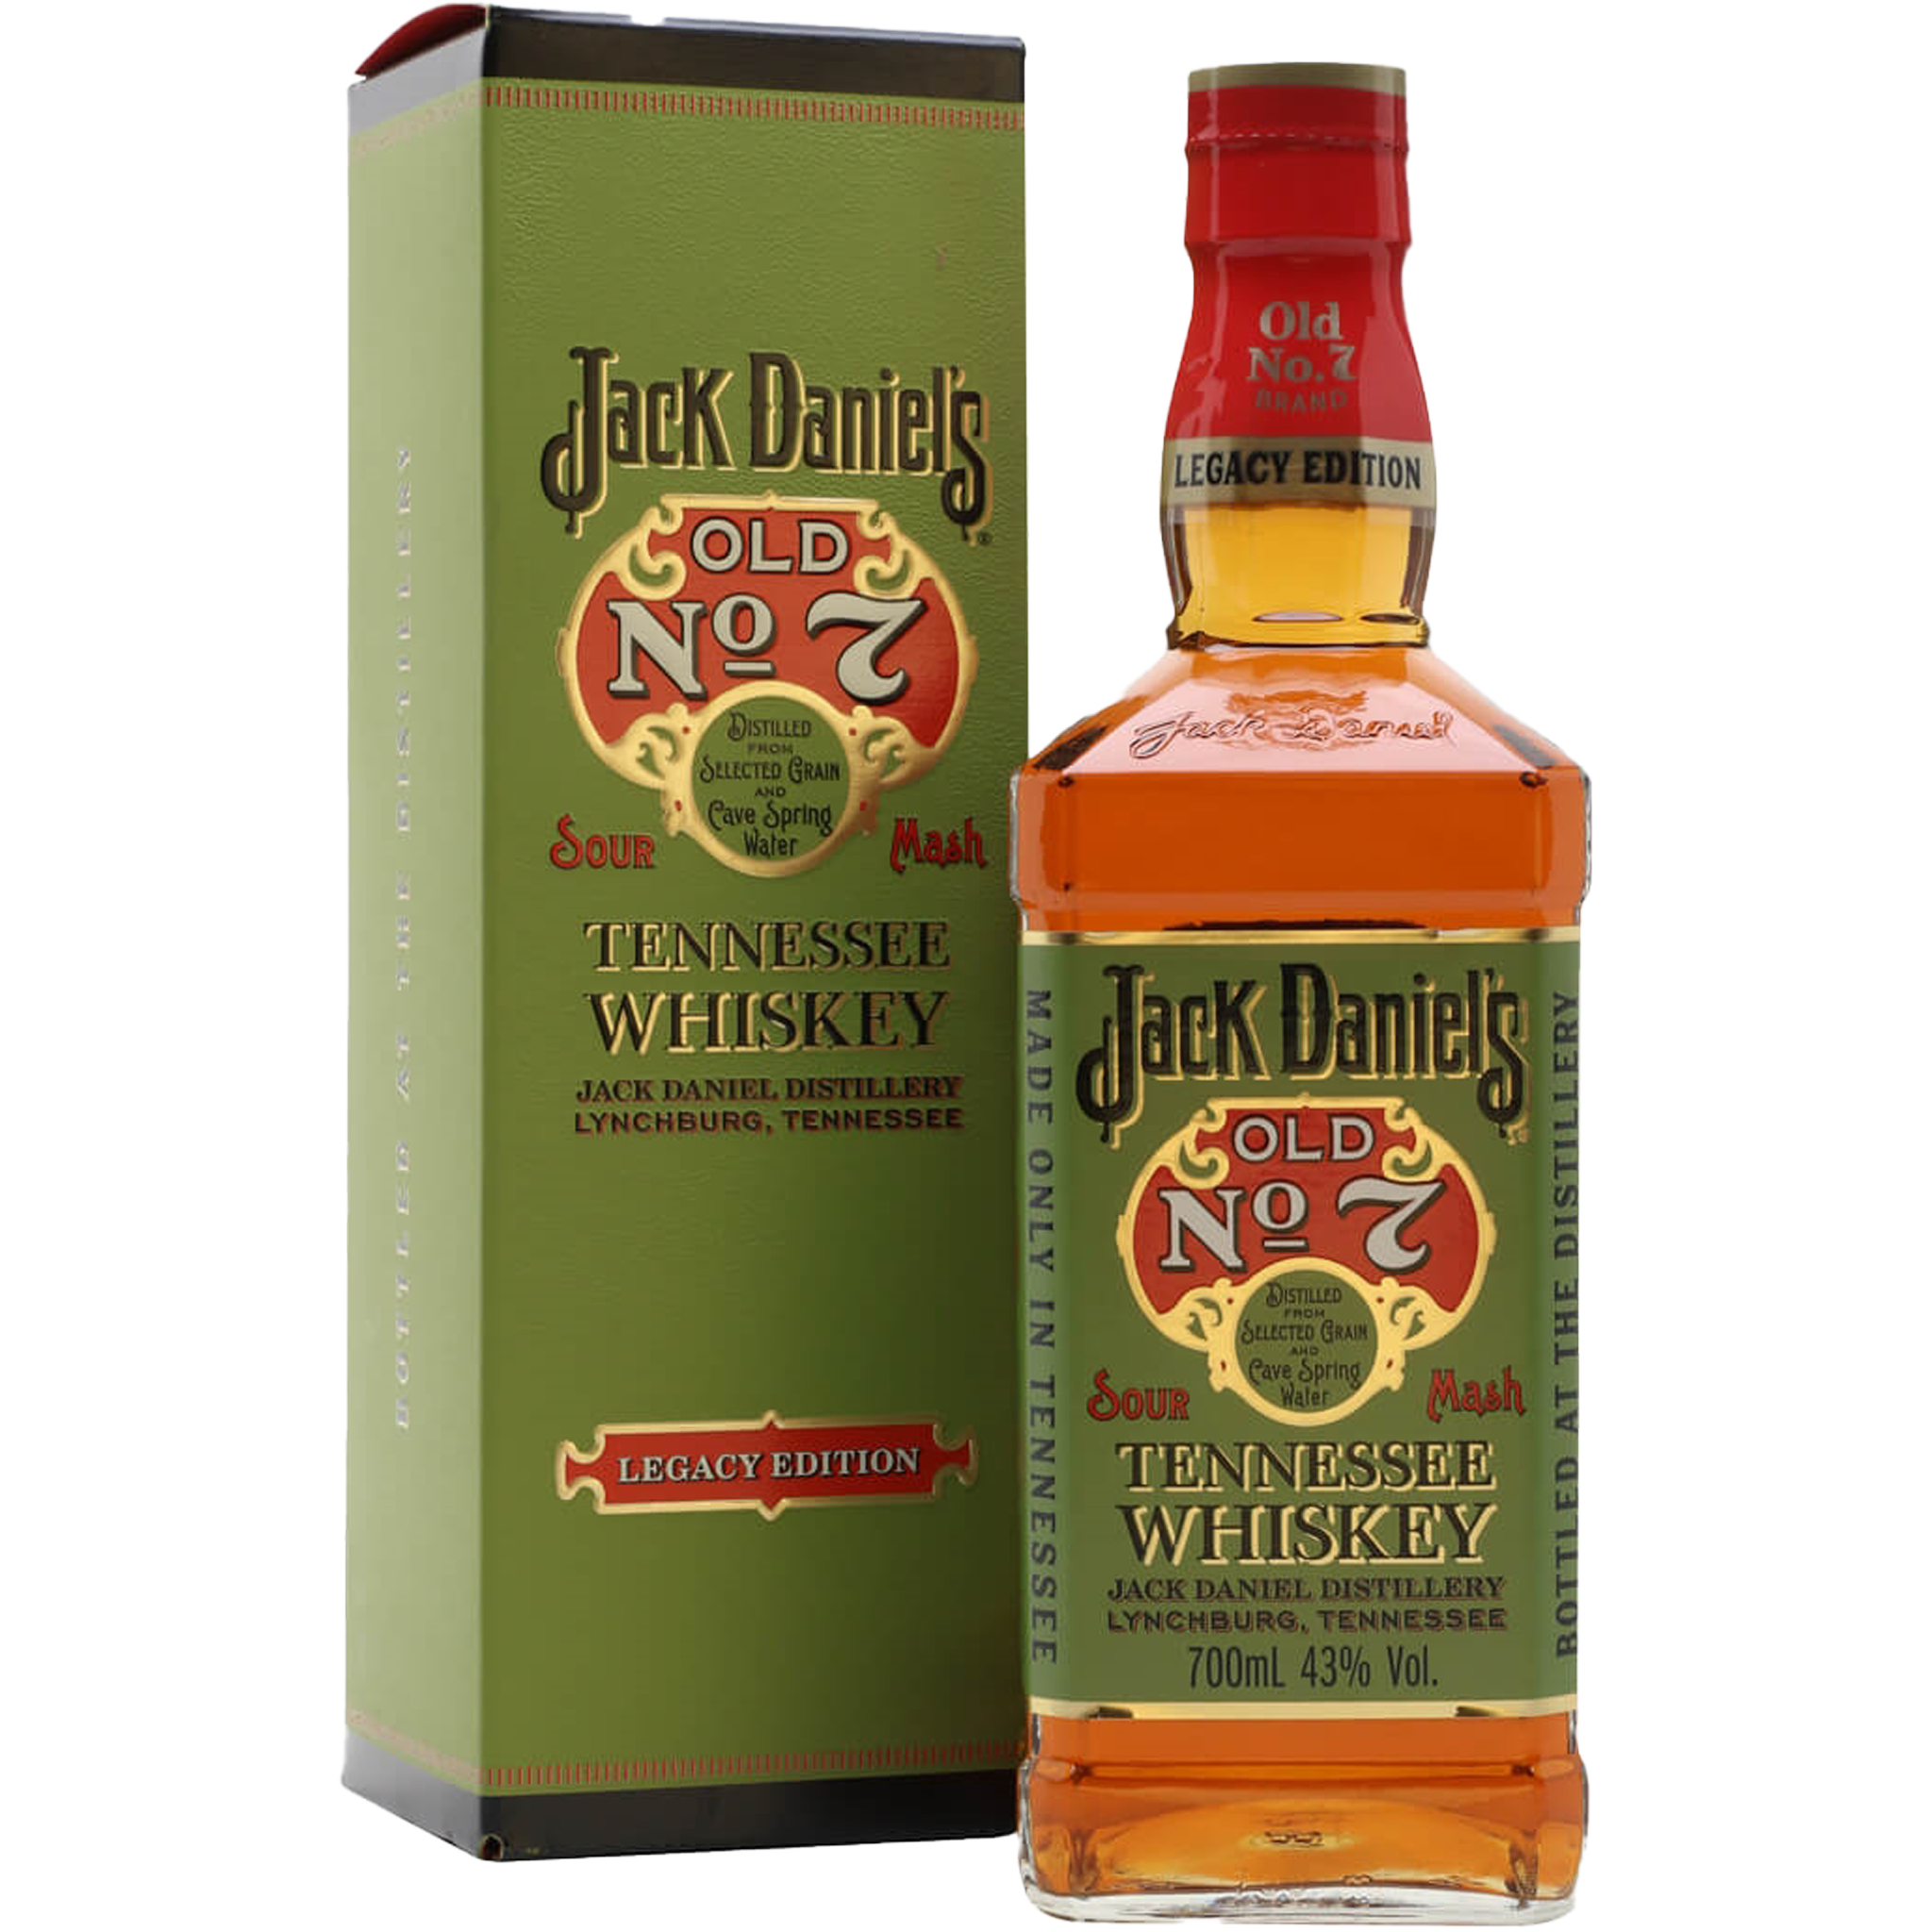 Jack Daniel's Old No 7 Sour Mash Tennessee Whiskey